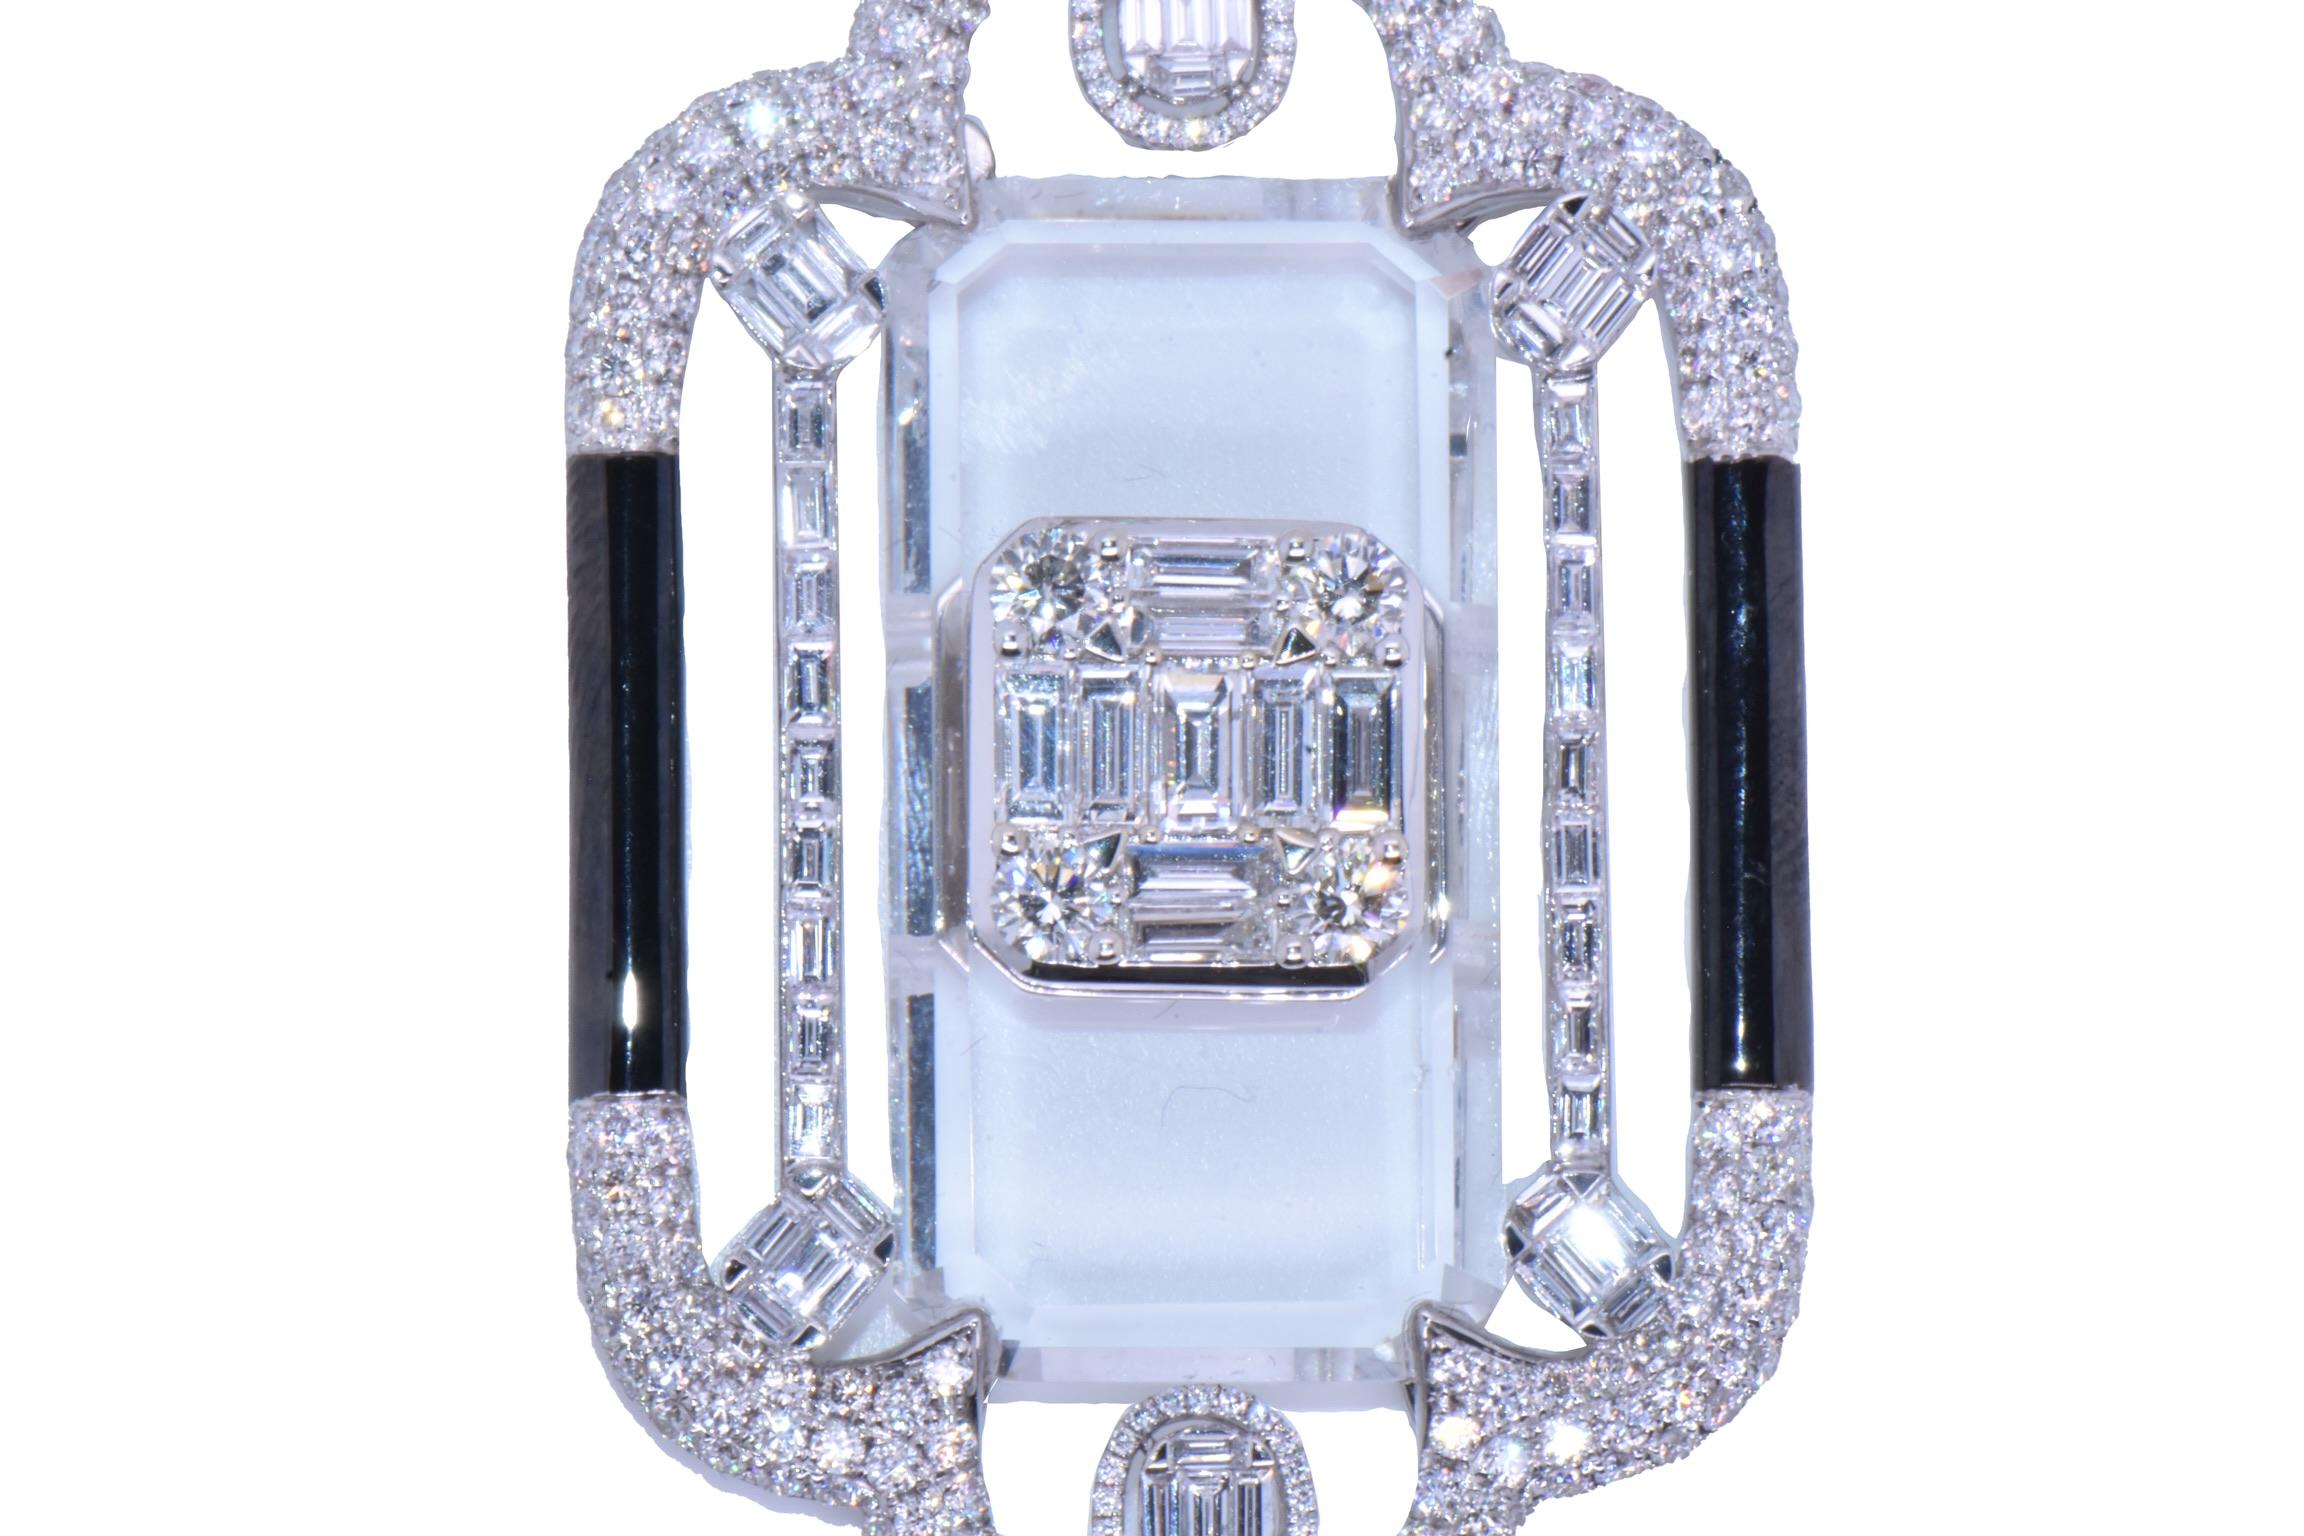 30.40 Carat Sunray Crystal & Diamond Pendant In 18k White
Beautiful One of a Kind Art-Deco Style Pendant, with Diamond Borders, Baguette and Clack Enamel Briges, and a Baguette Diamond Center Set on top of a Sunray Crystal 

Total Crystal Carat